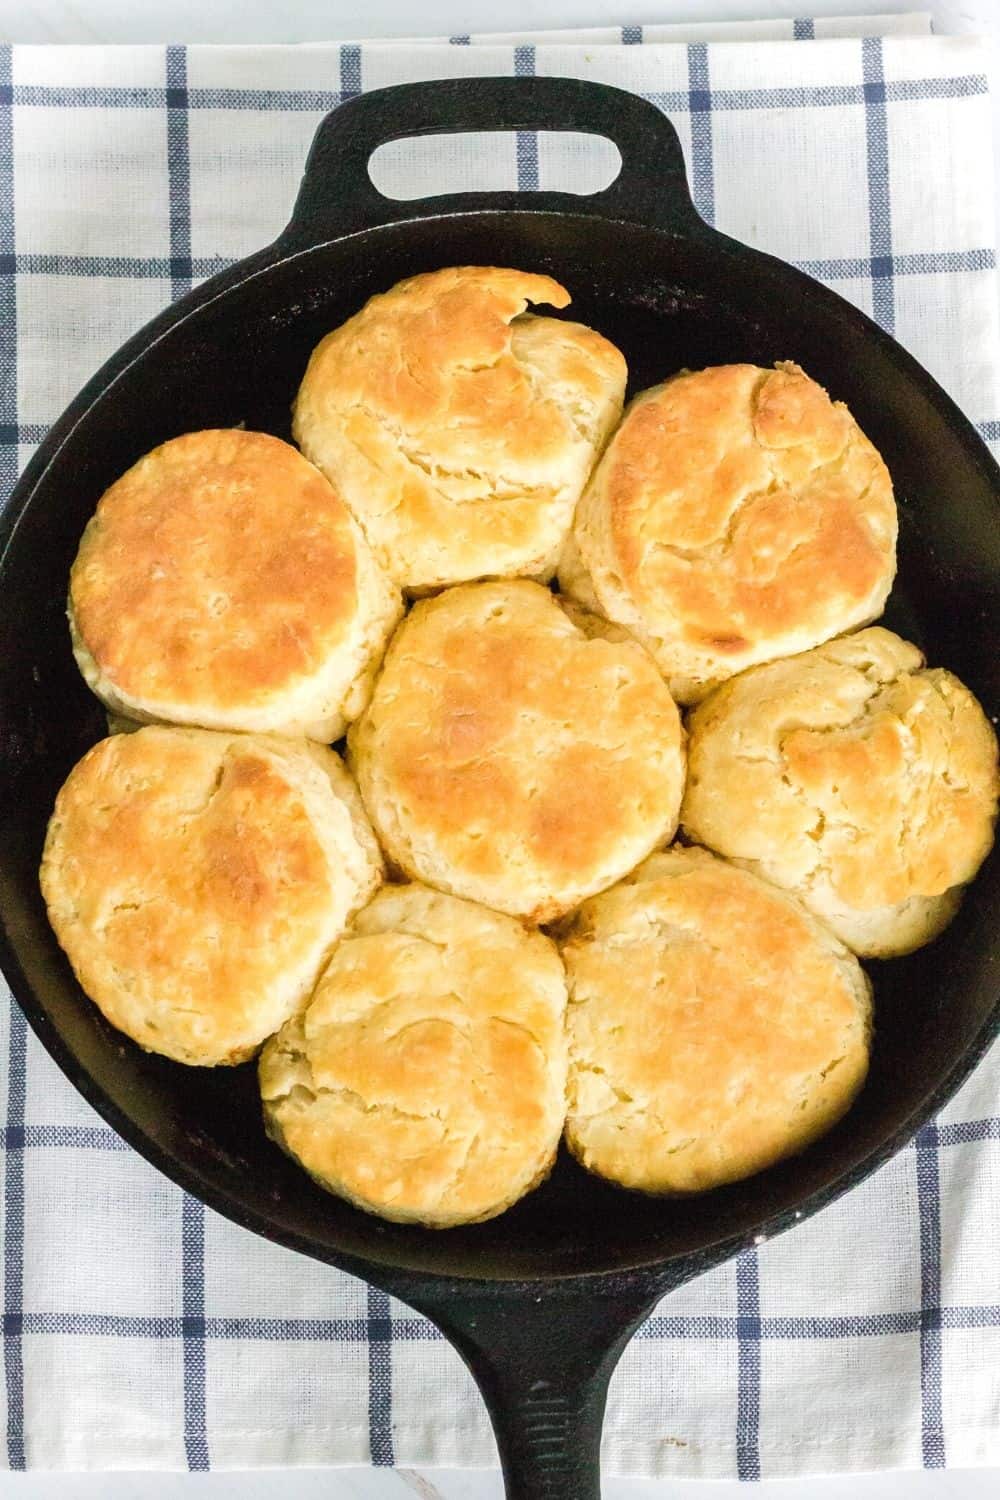 southern style homemade biscuits in a cast iron pan on top of a blue and white checkered kitchen towel